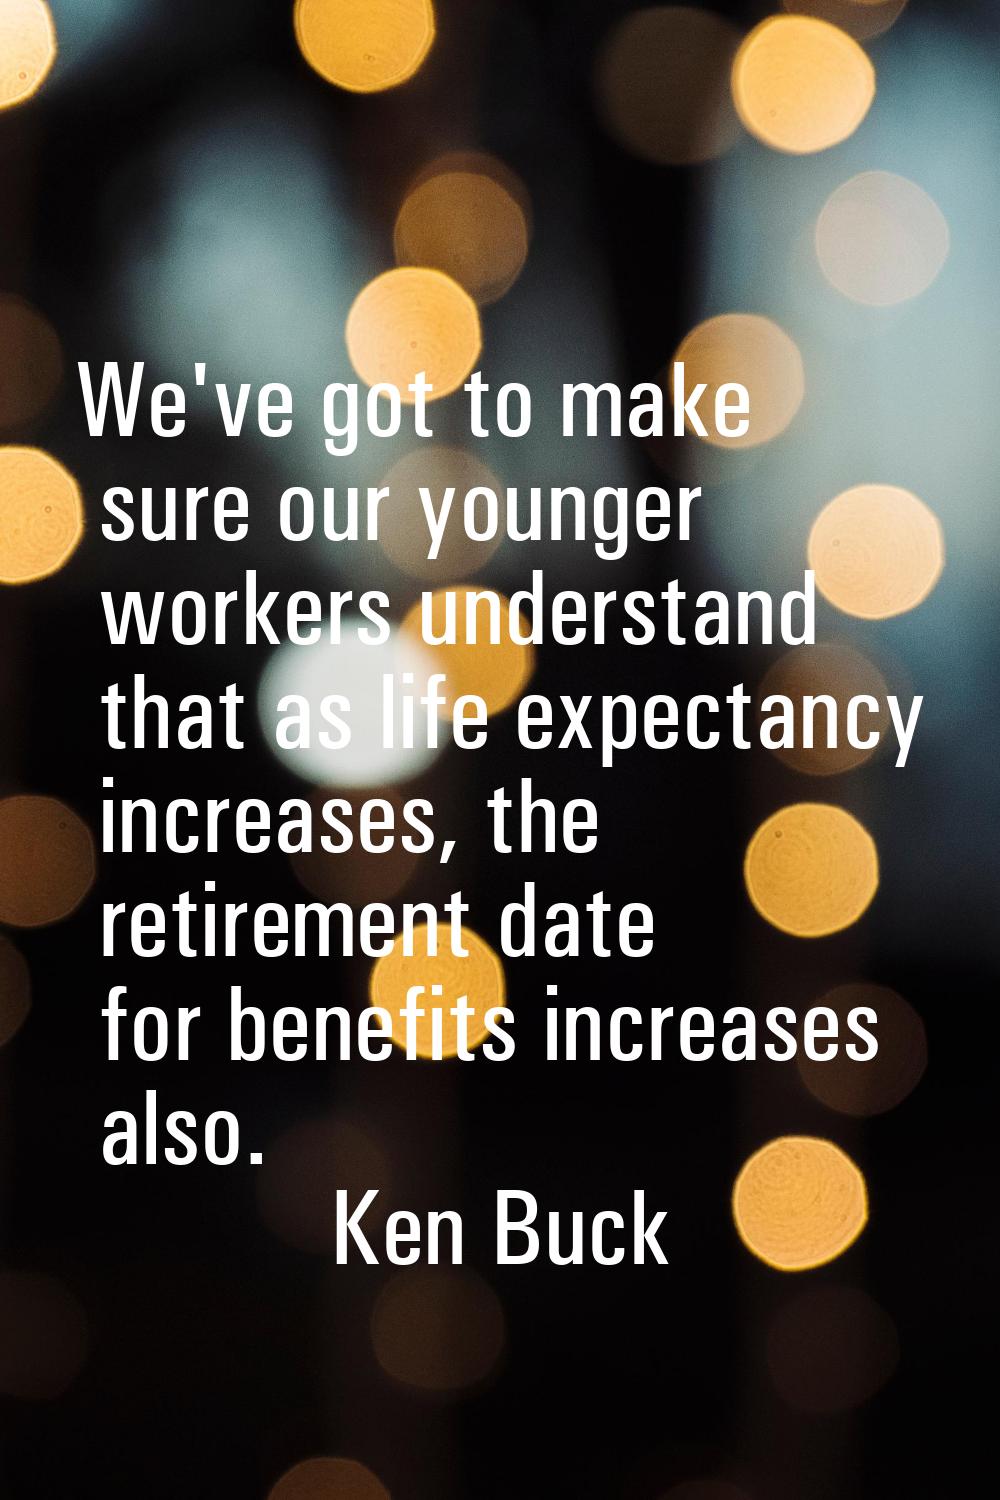 We've got to make sure our younger workers understand that as life expectancy increases, the retire